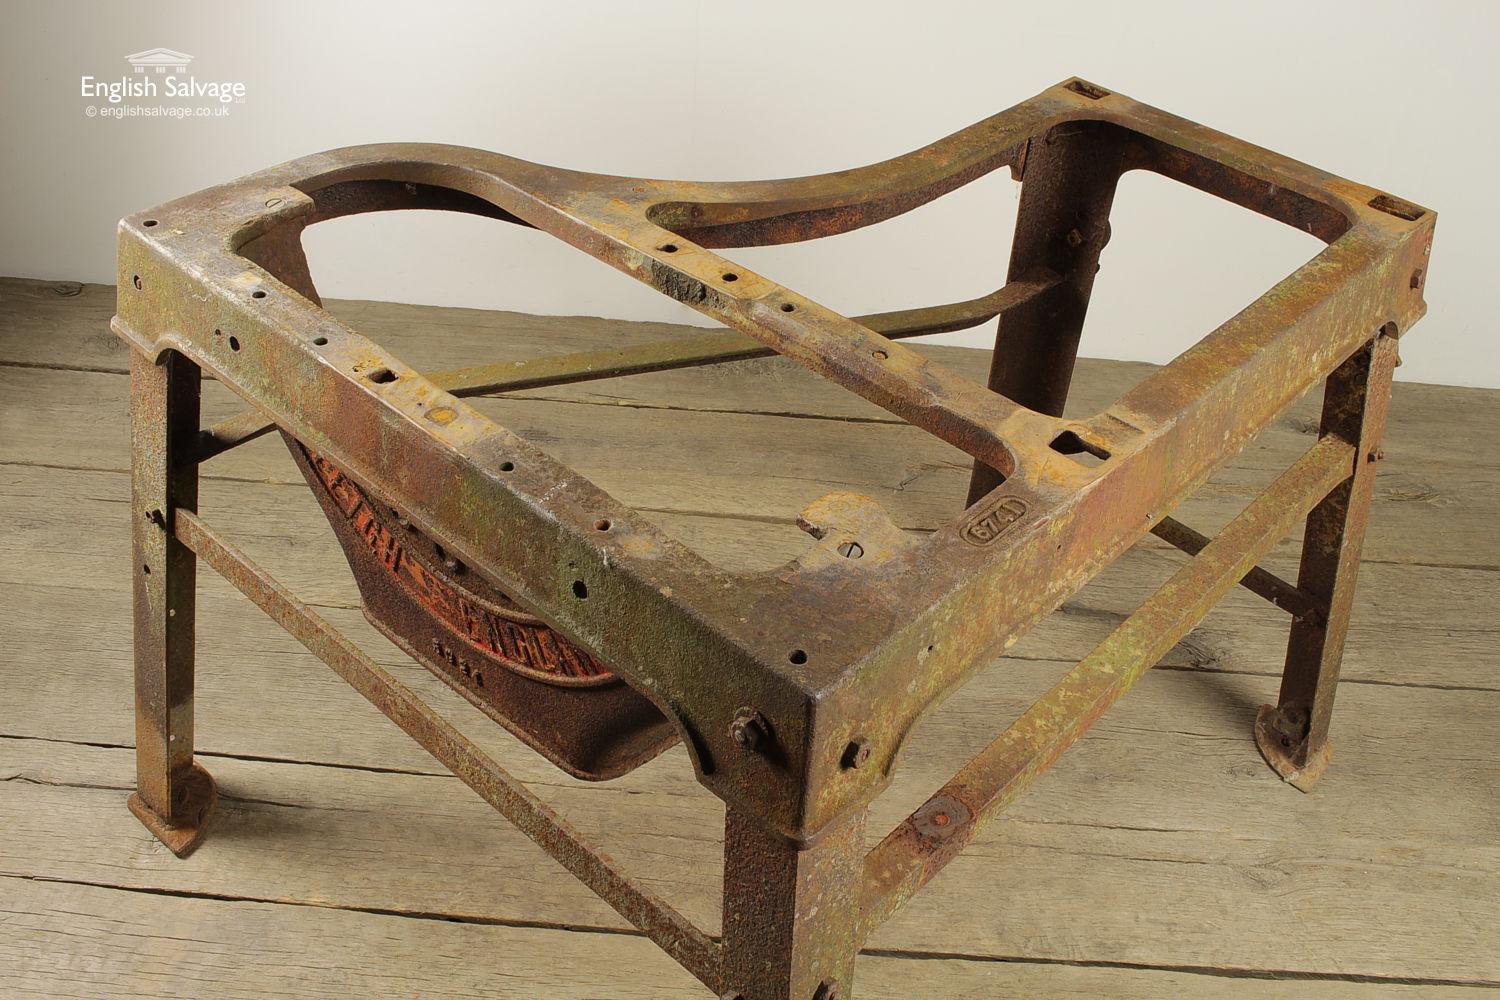 European Salvaged Cast Iron Industrial Table Base, 20th Century For Sale